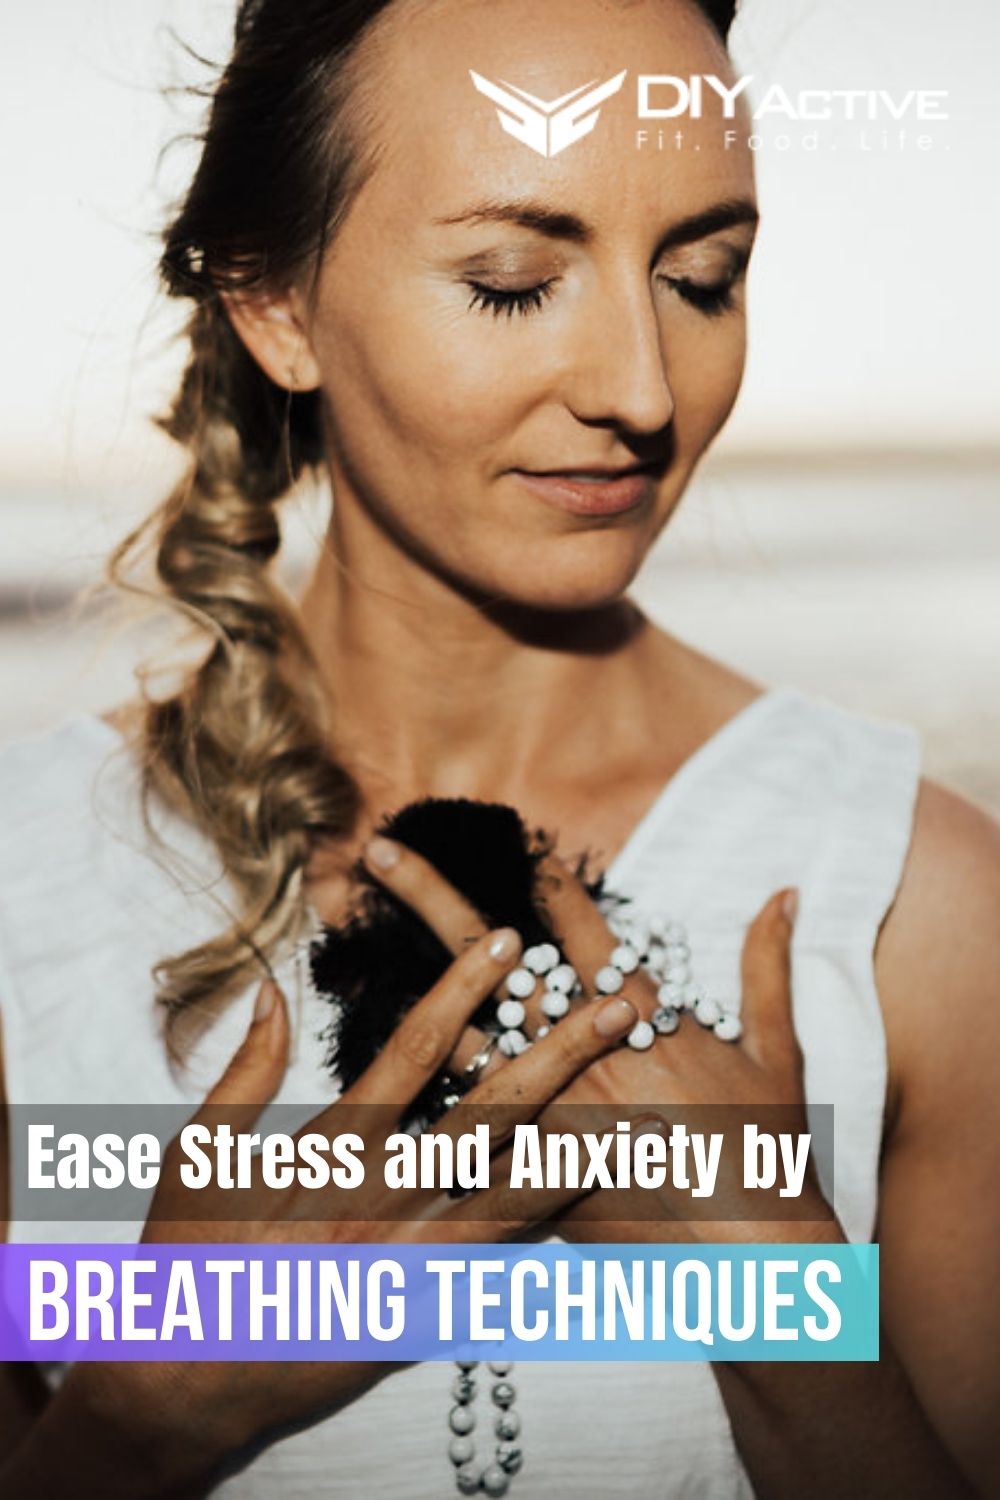 4 Breathing Techniques You Can Do Anywhere to Combat Anxiety 2